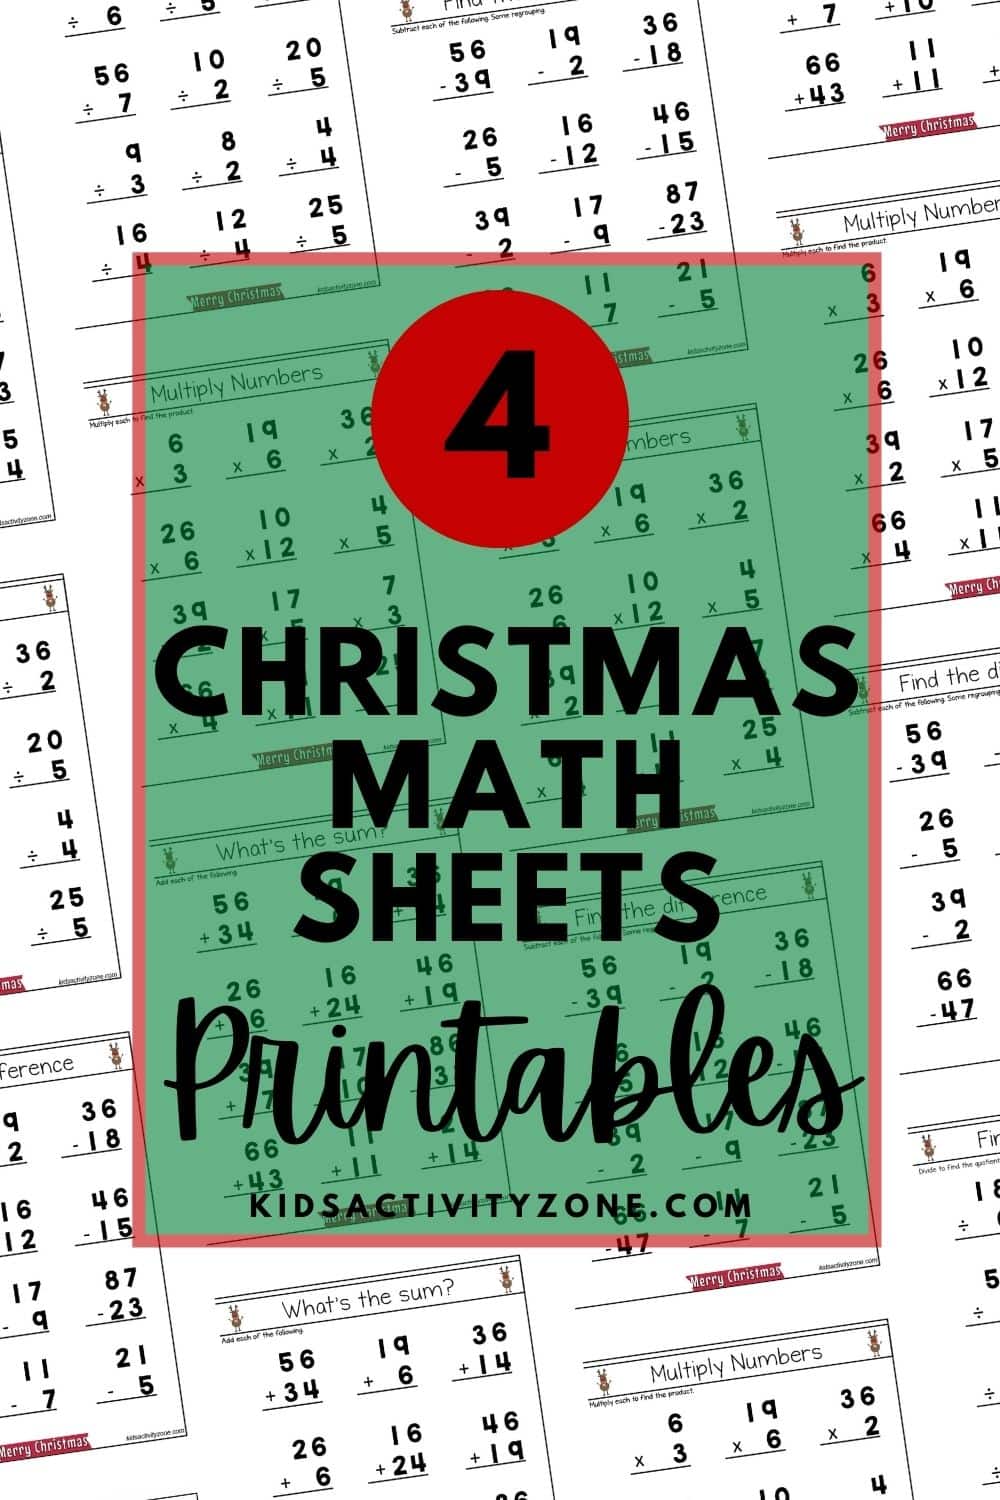 A set of five math worksheets with a Christmas theme to make them fun! It includes a page of addition, division, multiplication and two pages of subtraction, one page with regrouping and one without. Great addition to any classroom curriculum or at home practice!